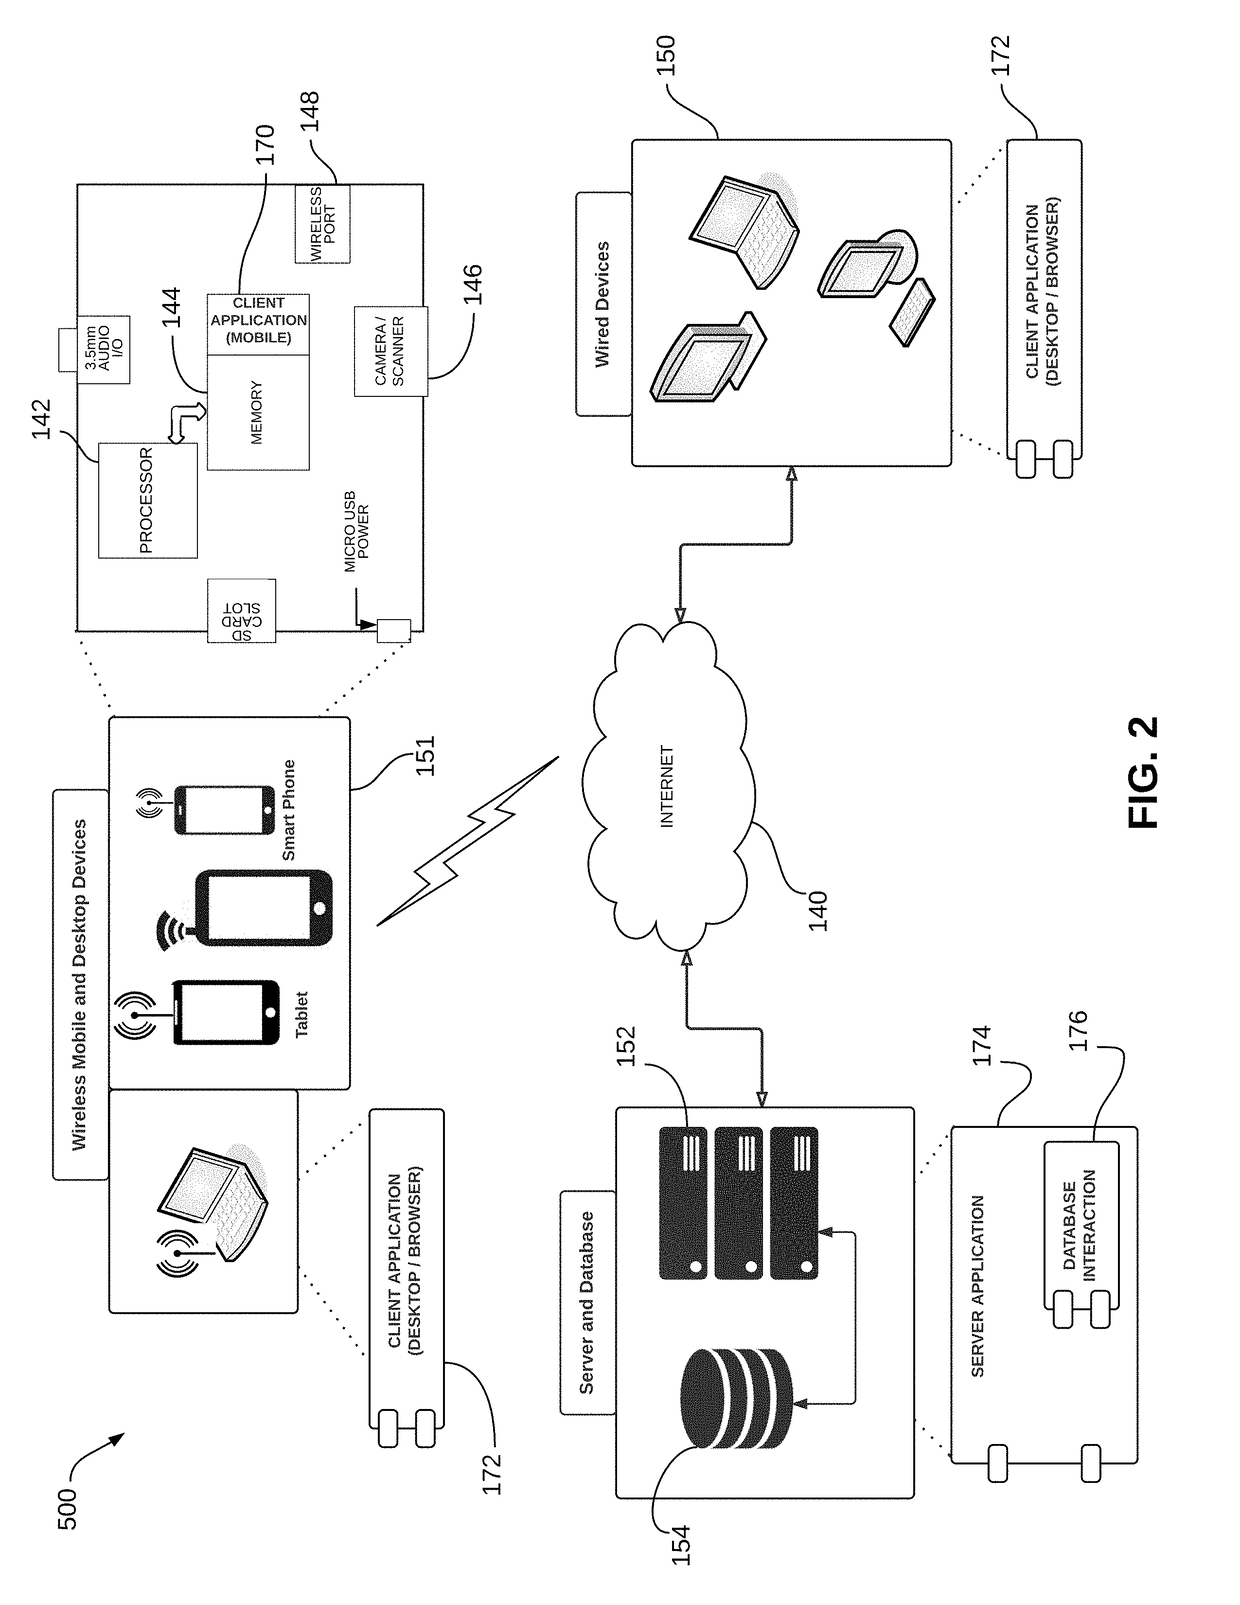 System and method for intelligently managing and distributing electronic business cards